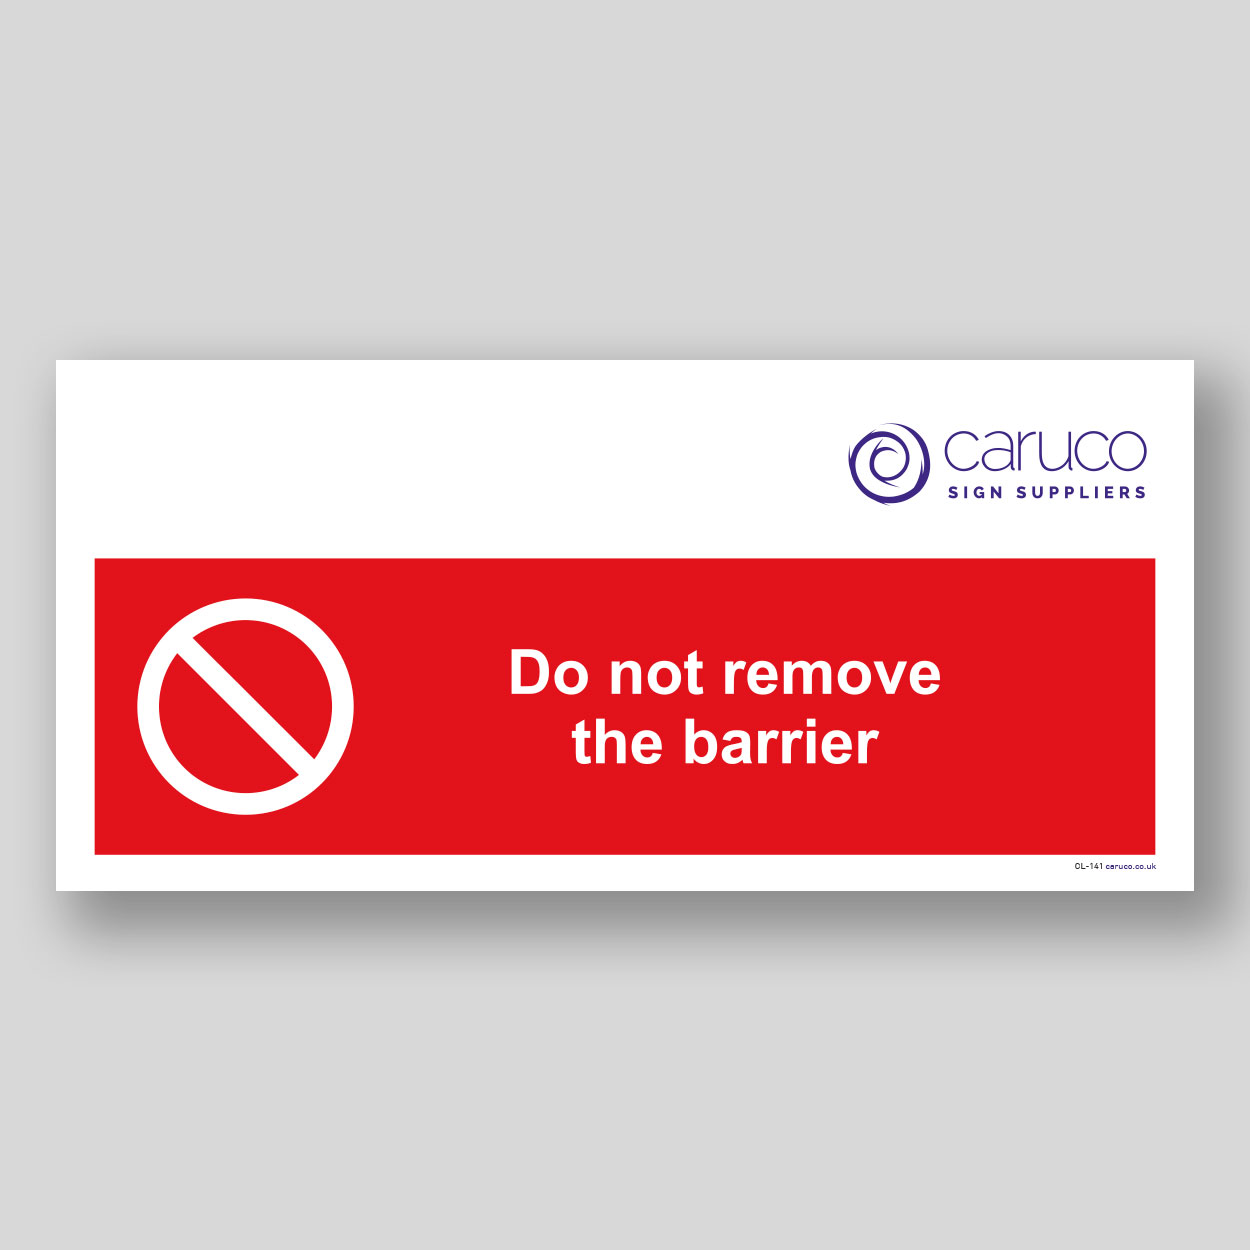 CL-141 Do not remove barrier